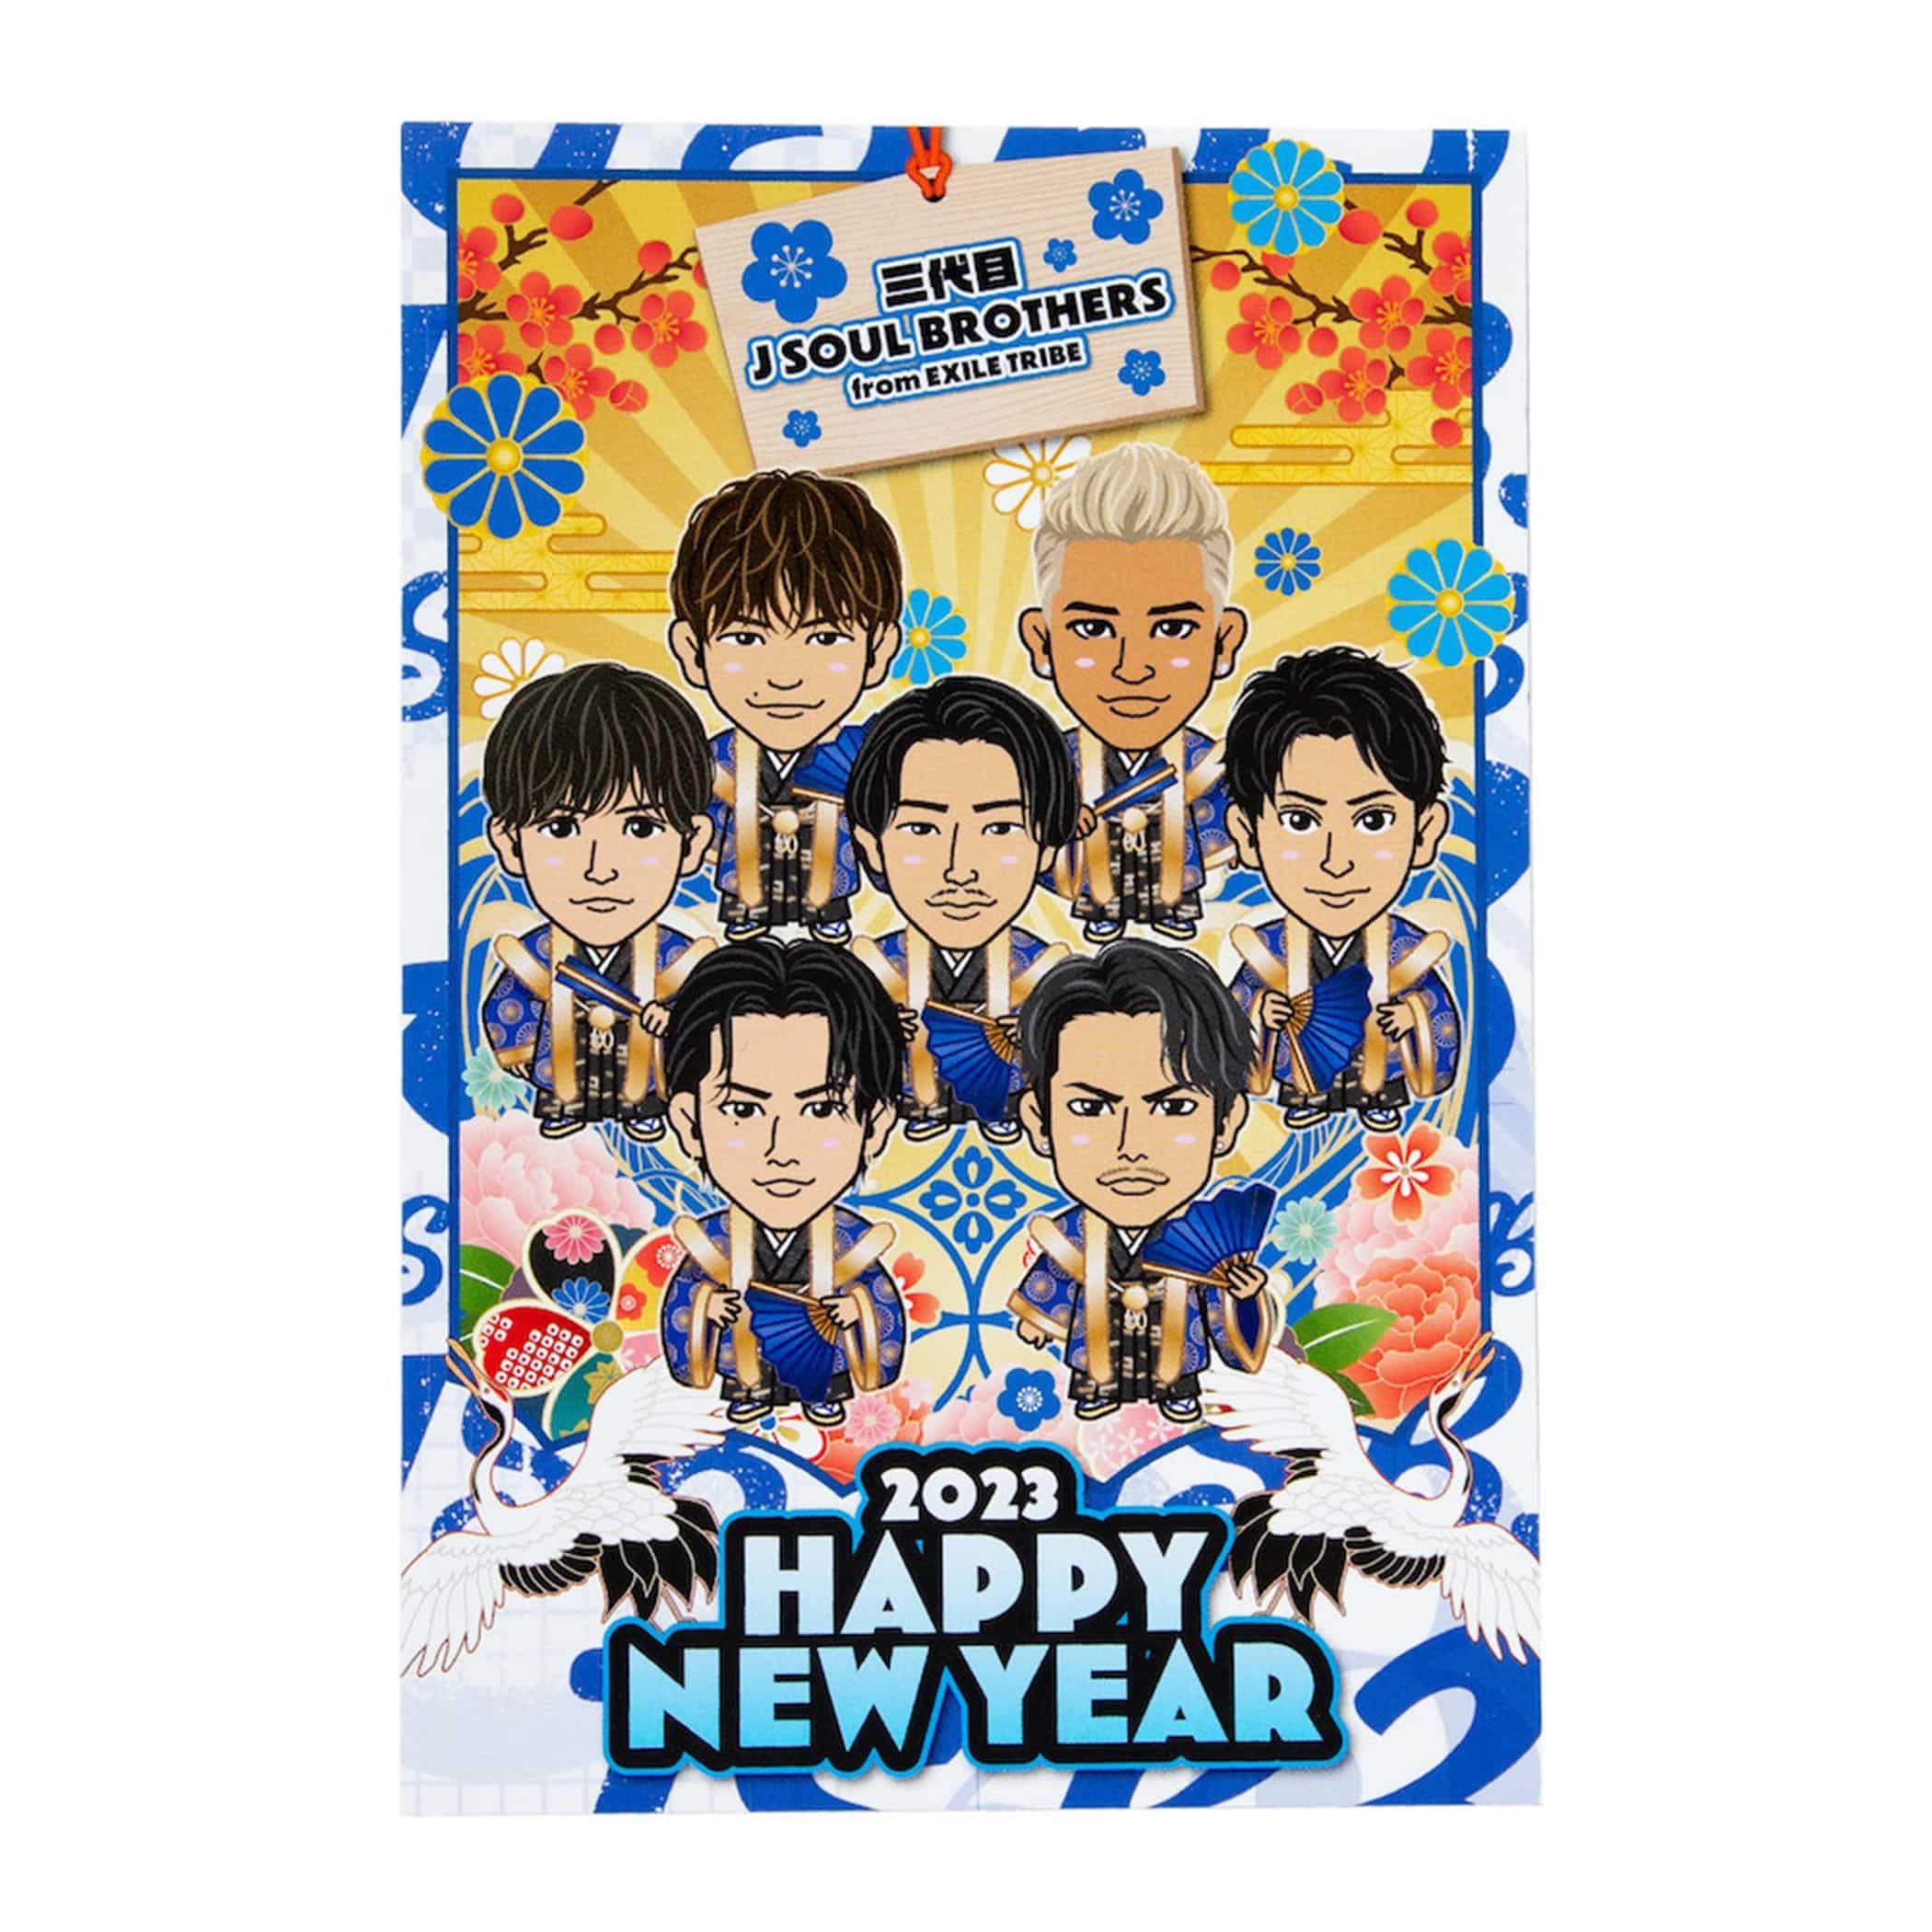 Exile Tribe Station Online Store New Year 23 年賀状3枚セット 三代目 J Soul Brothers